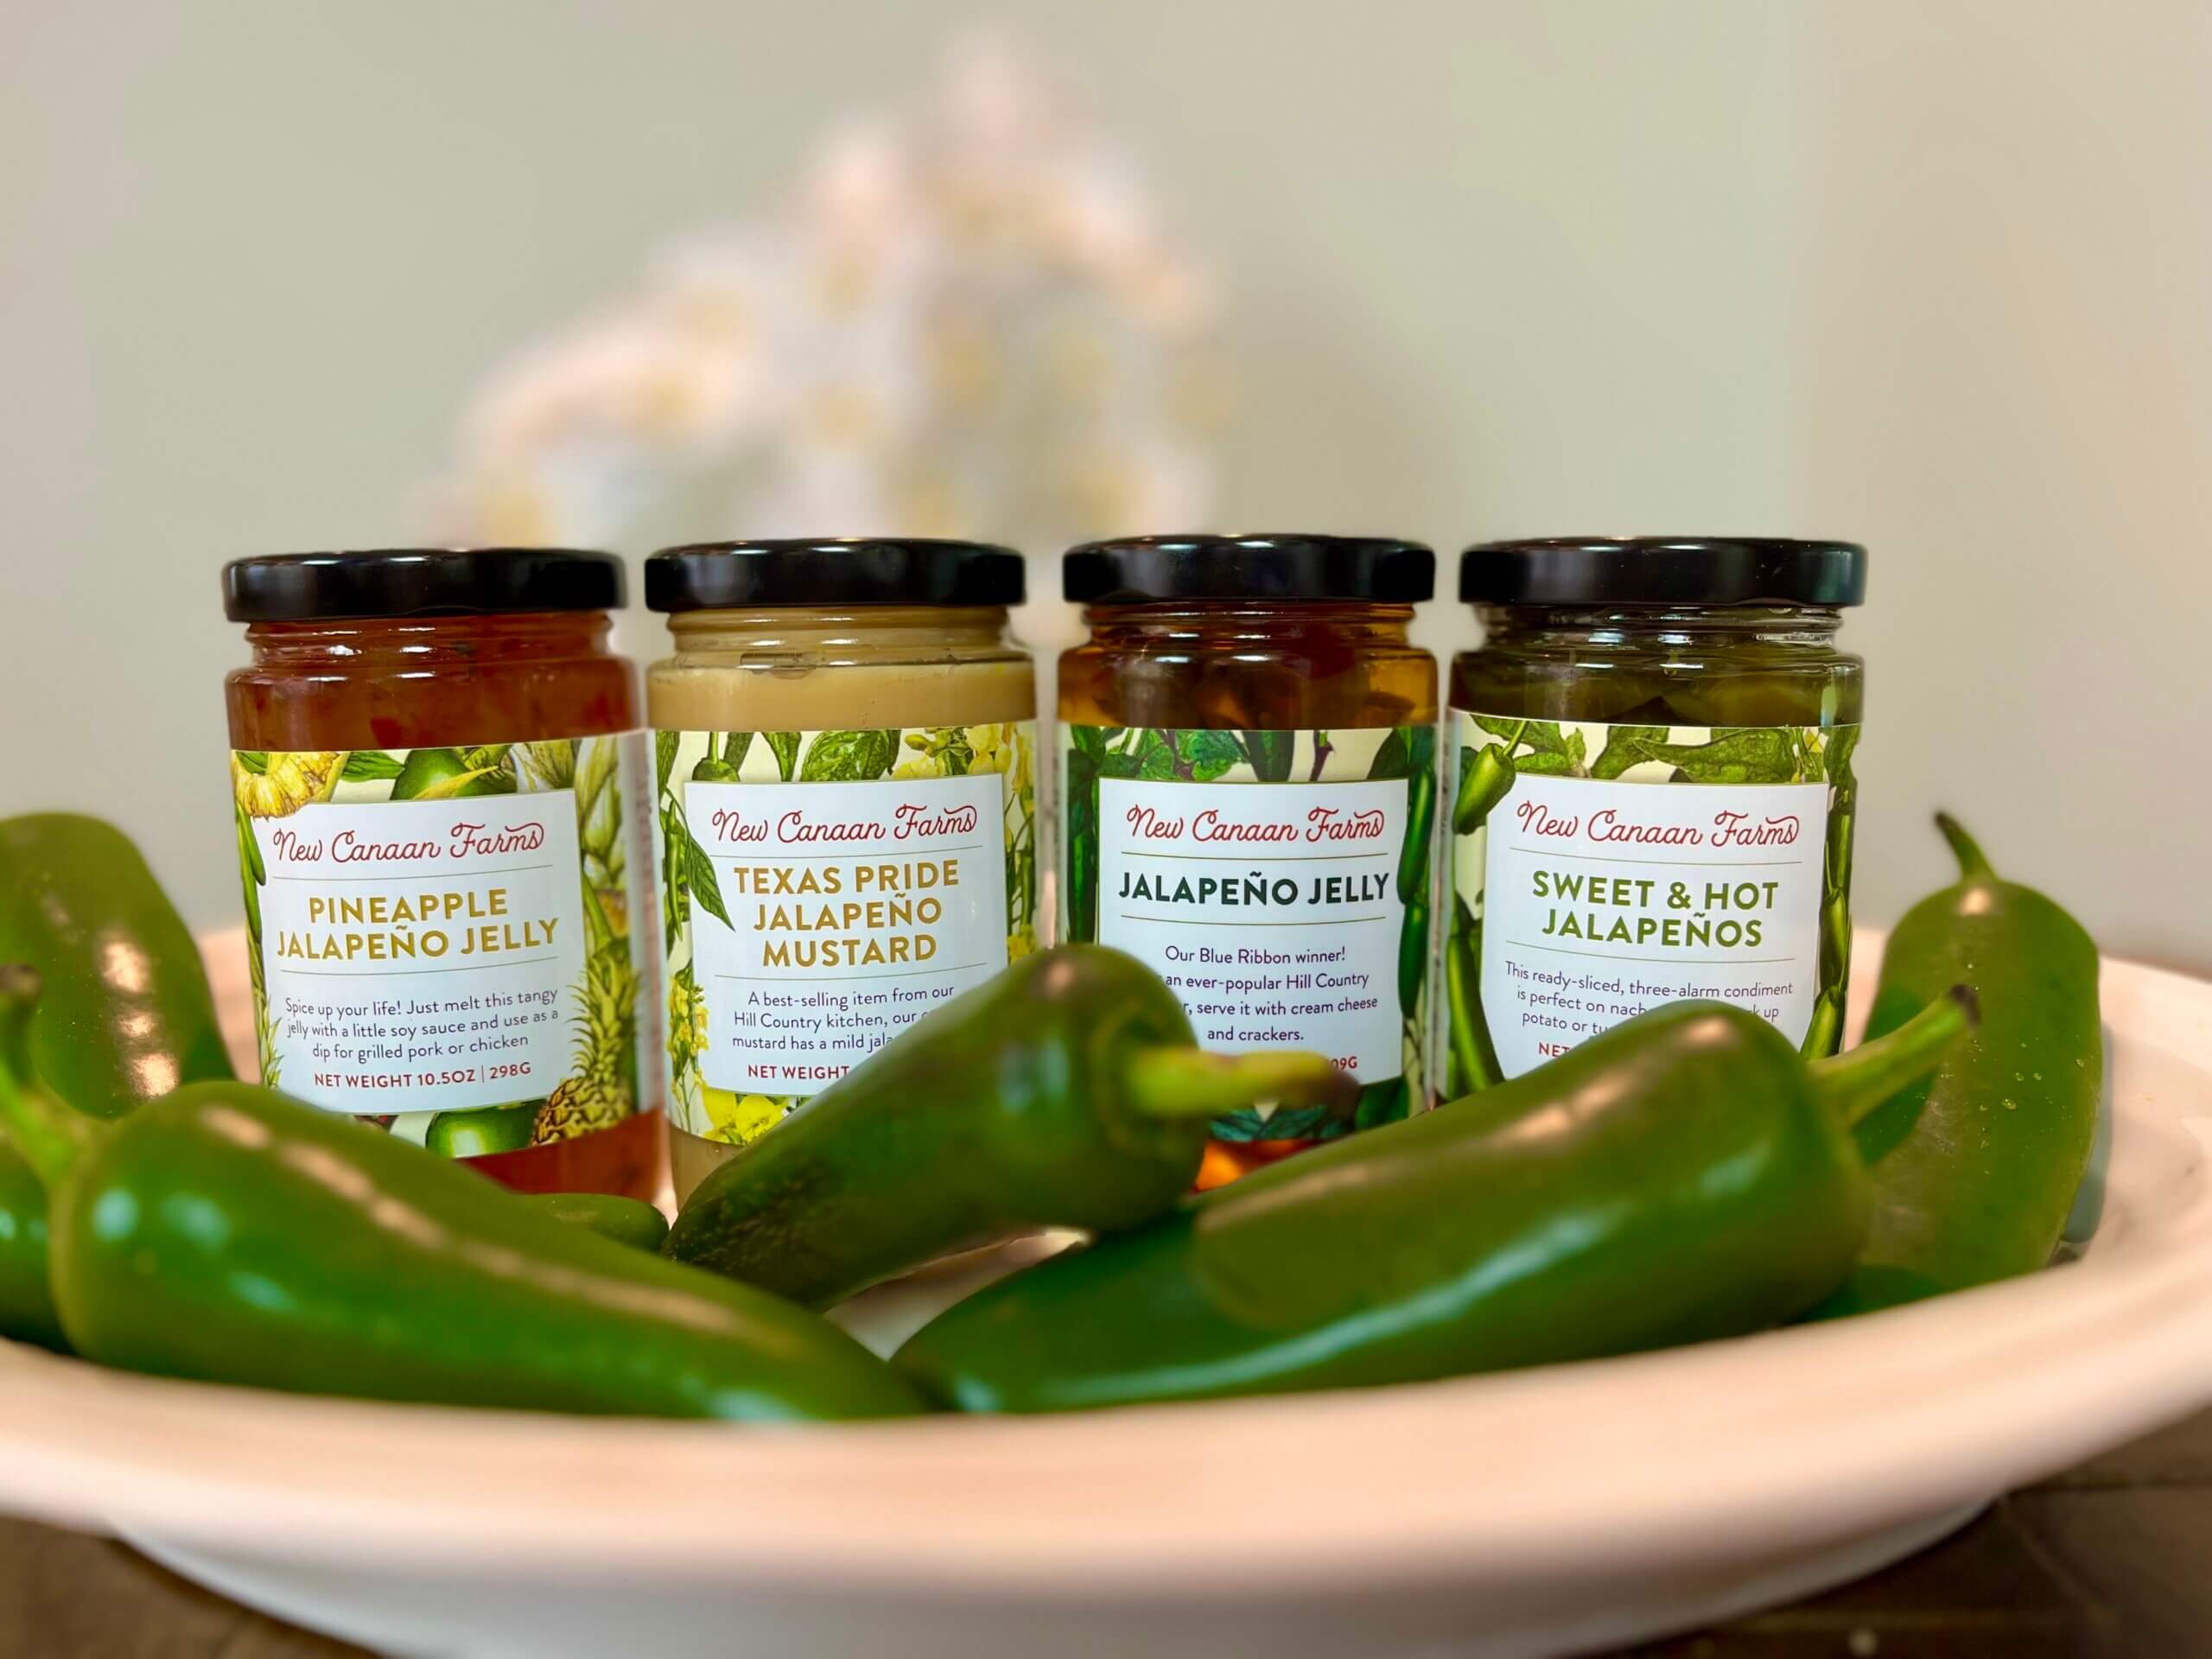 A collection of New Canaan Farms products that contain jalapeños